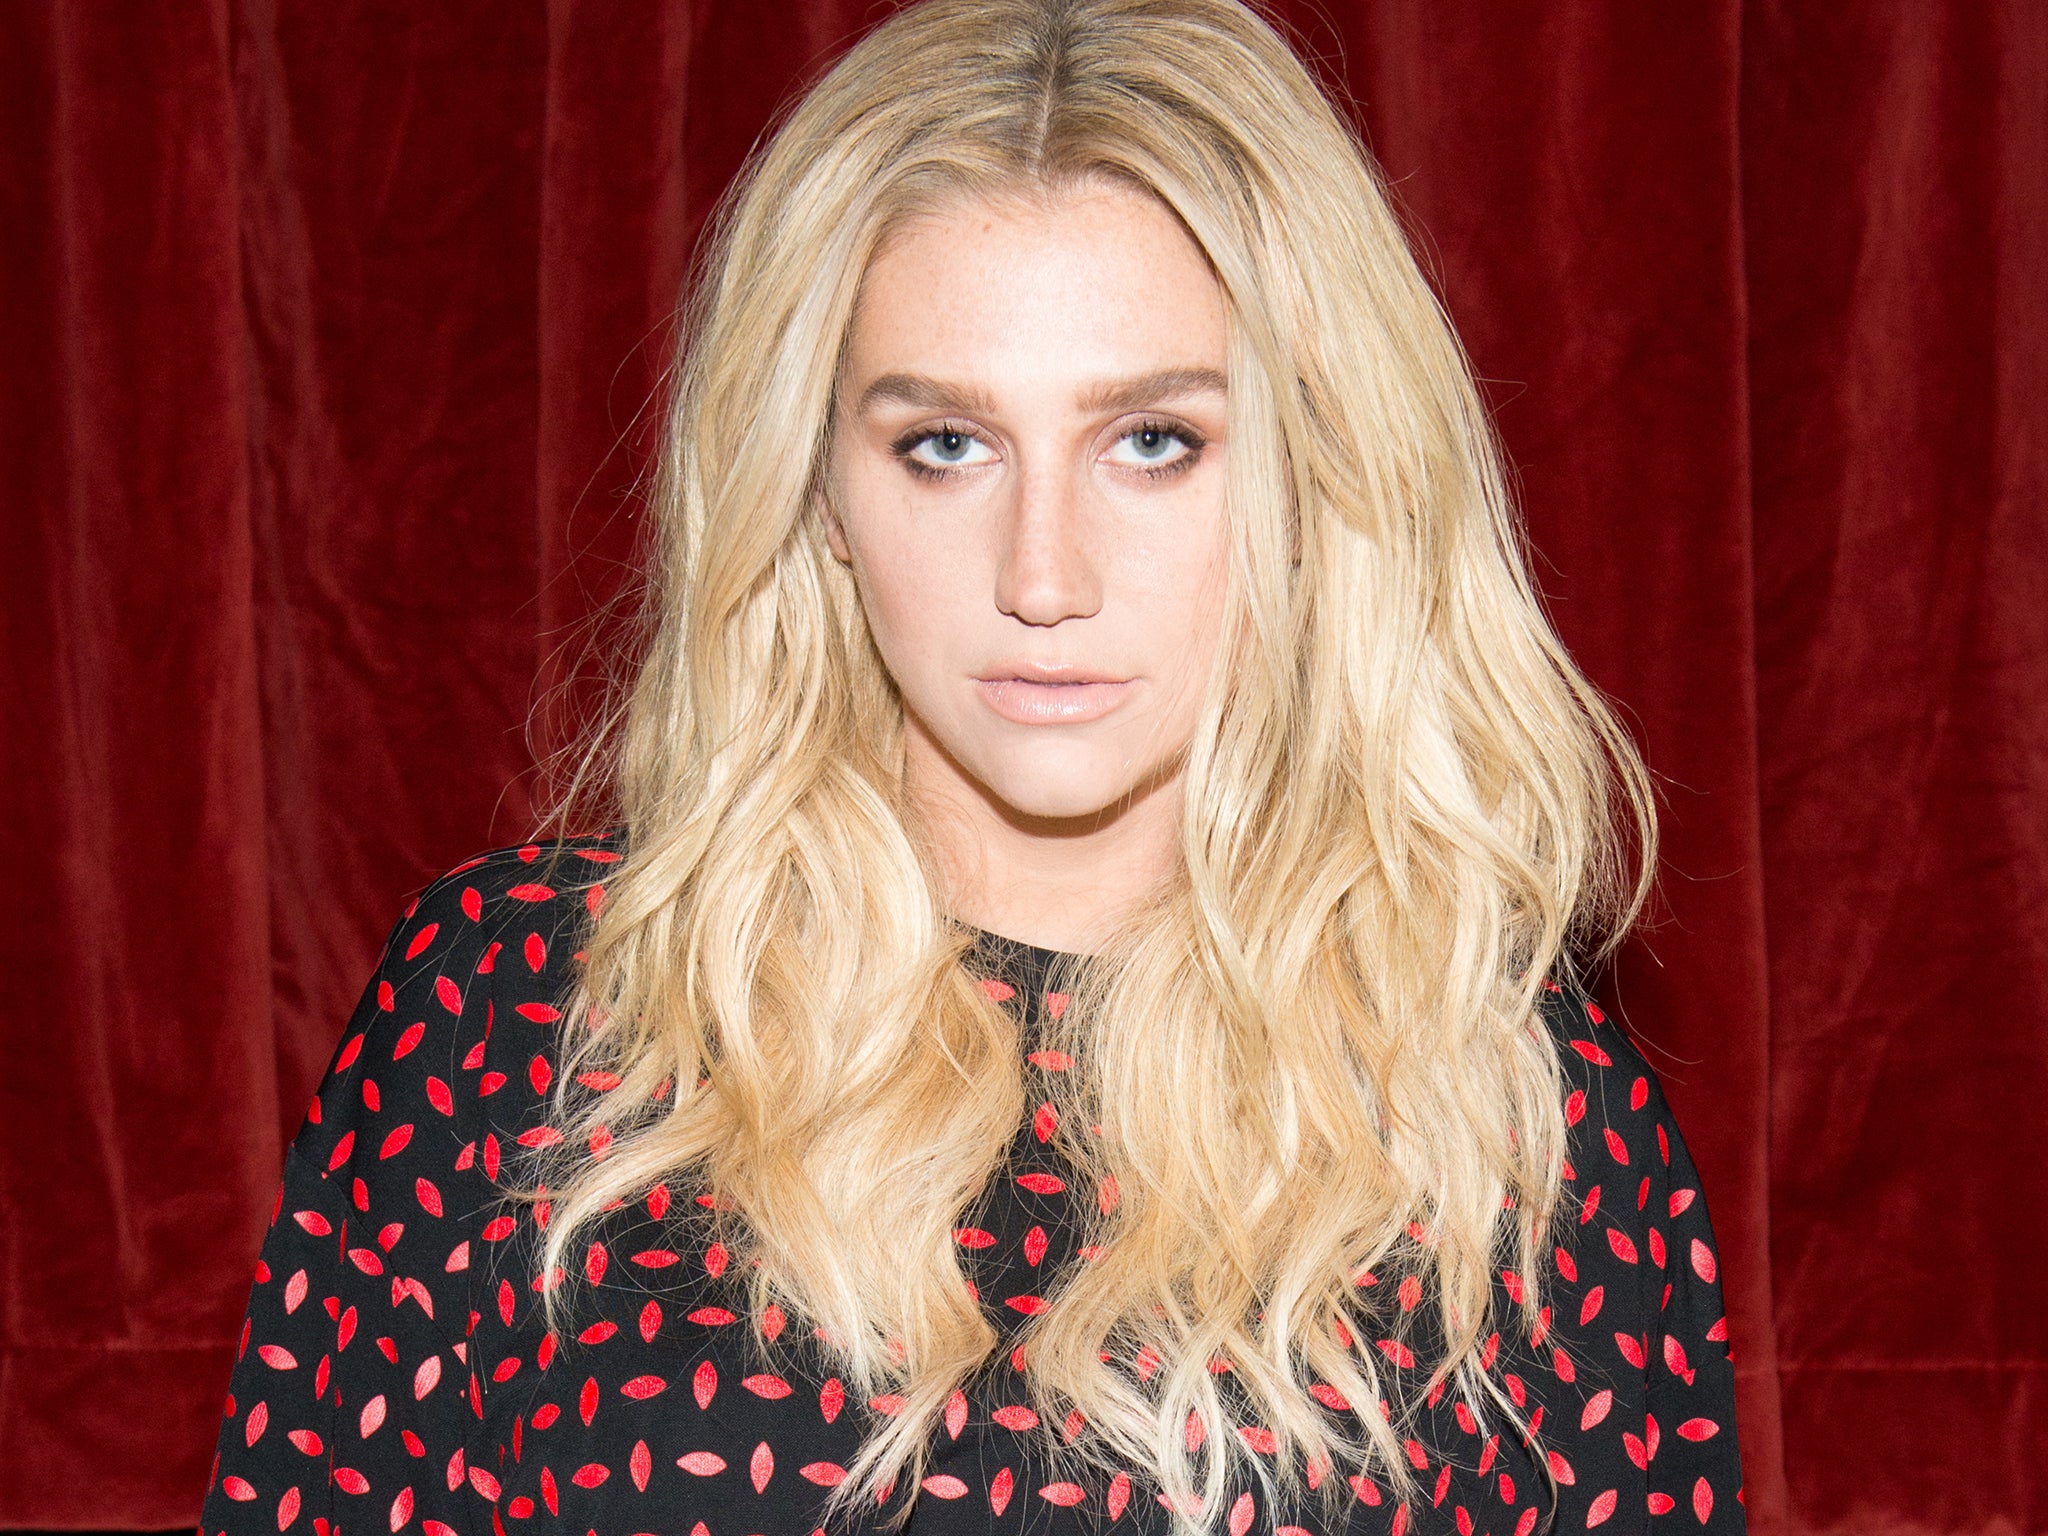 Kesha’s lawyers say the the abuse she suffered triggered suicidal thoughts